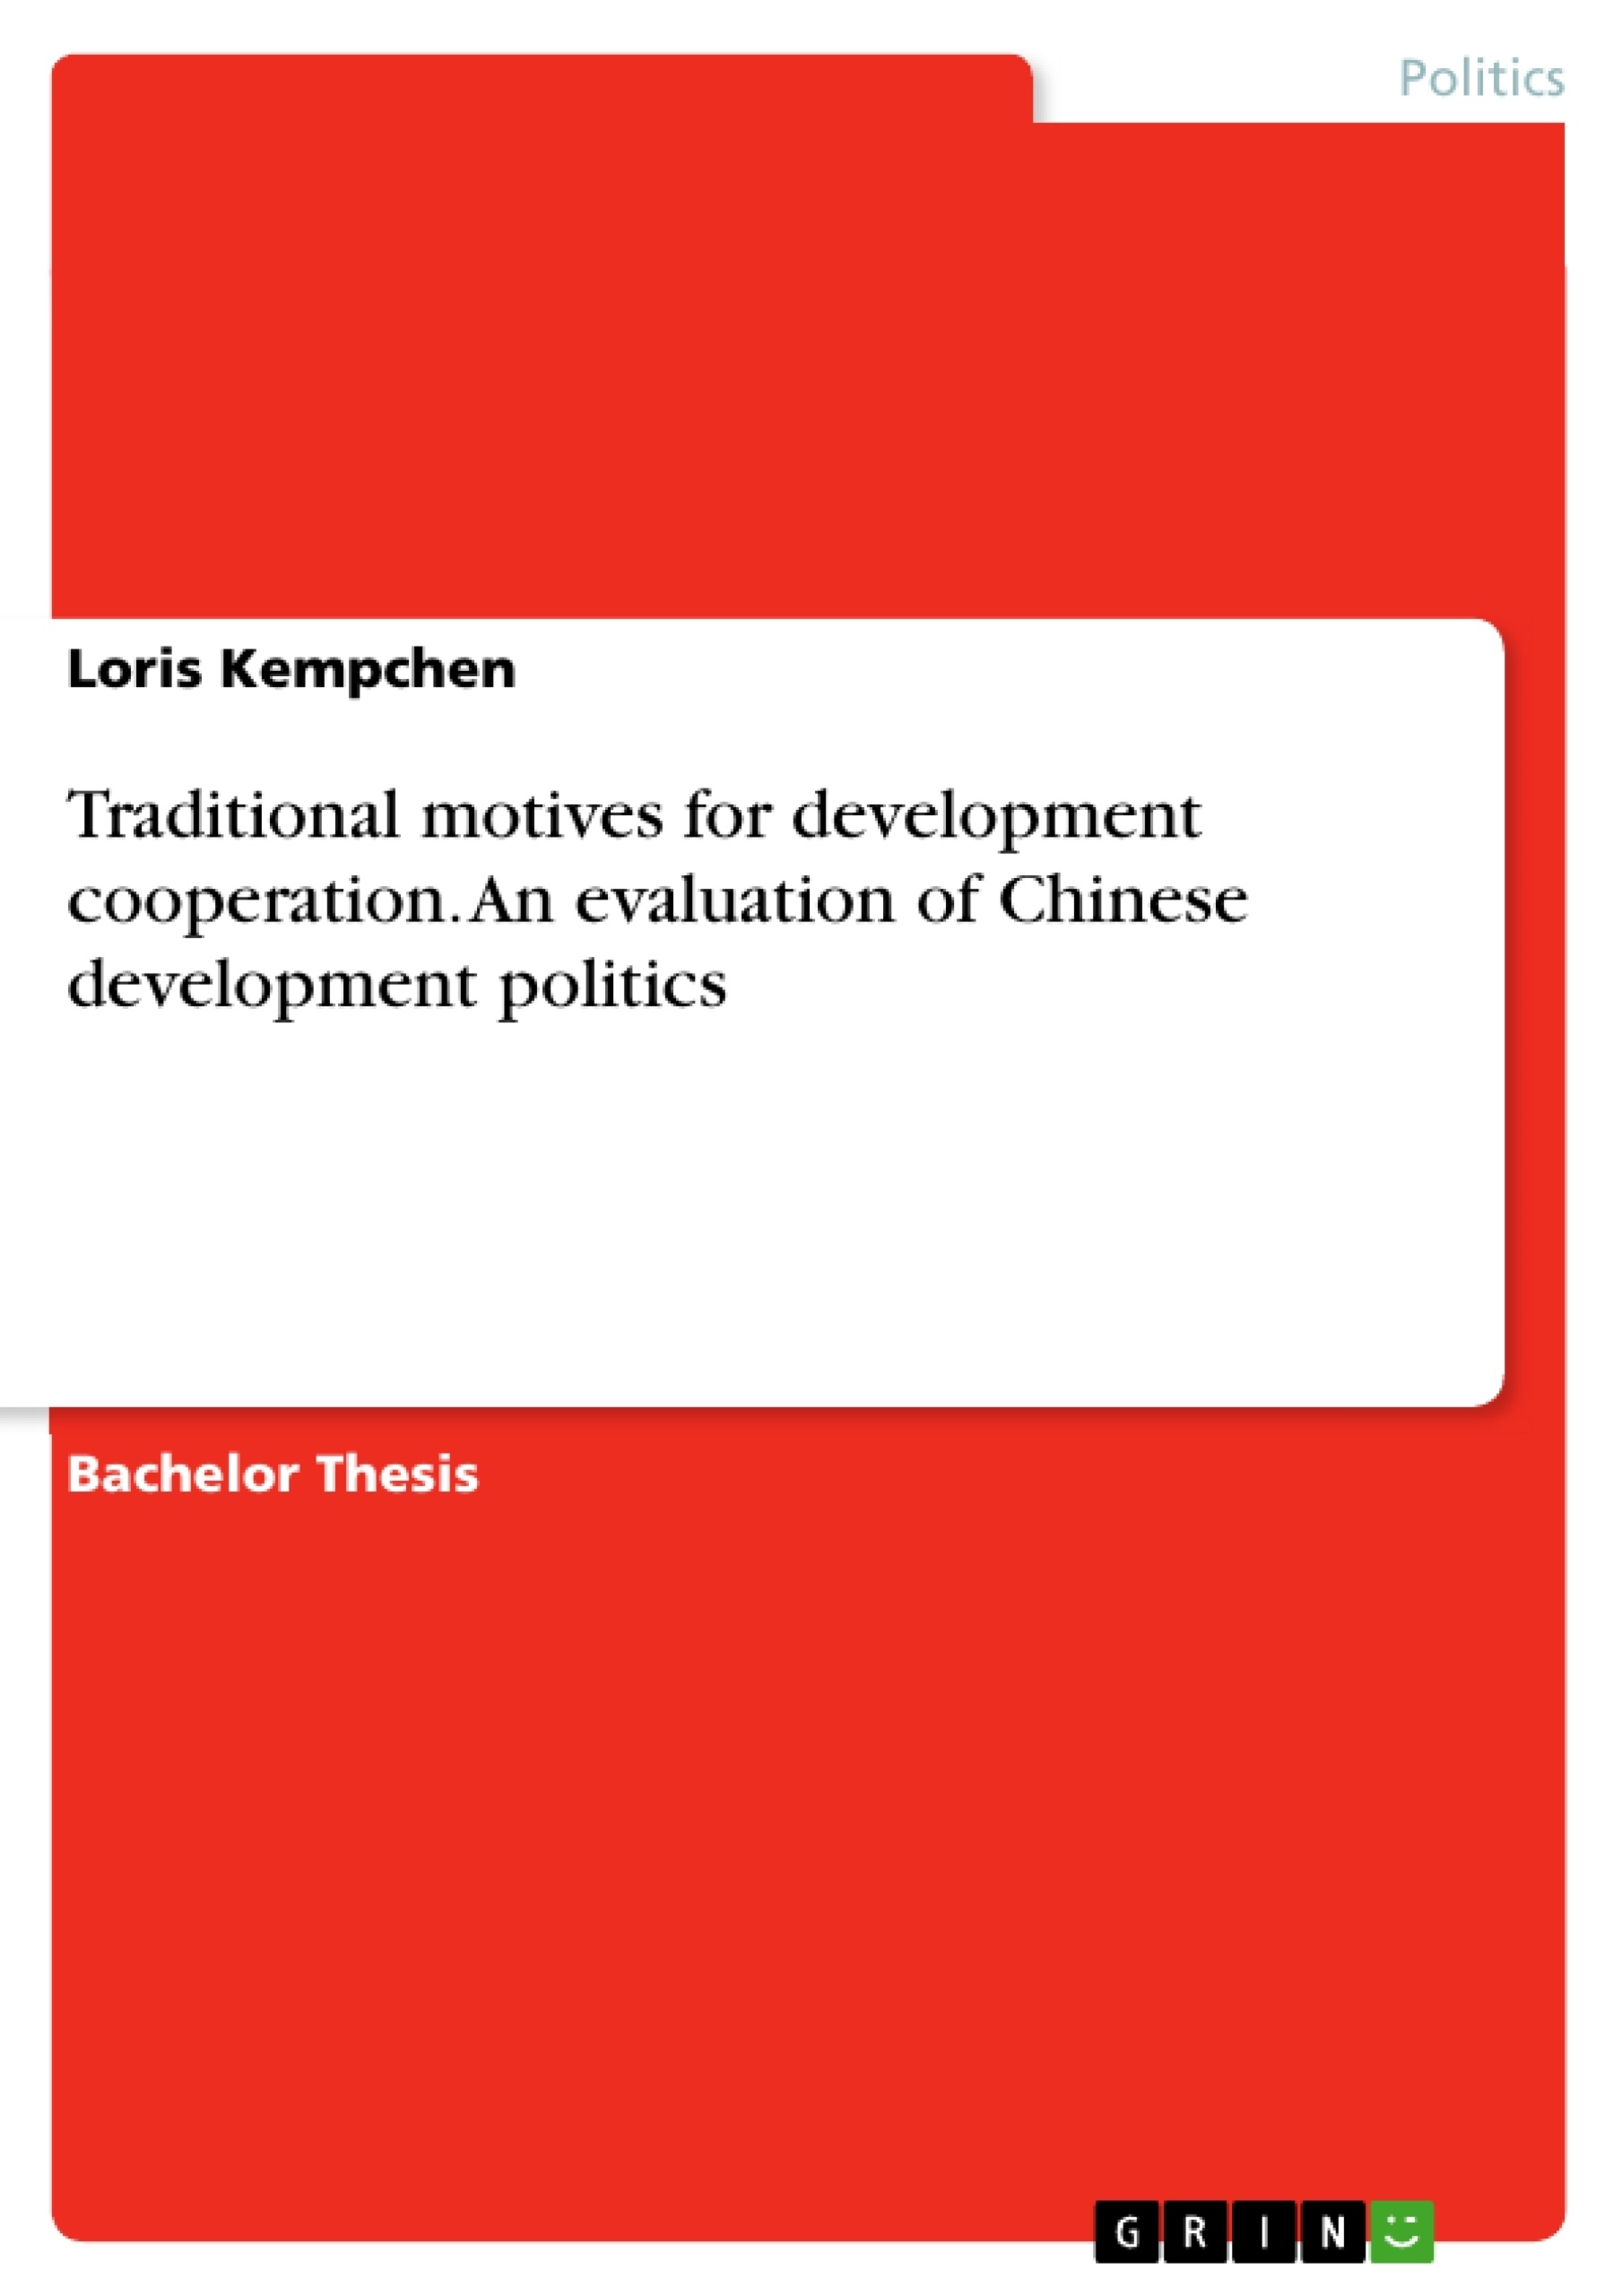 Título: Traditional motives for development cooperation. An evaluation of Chinese development politics